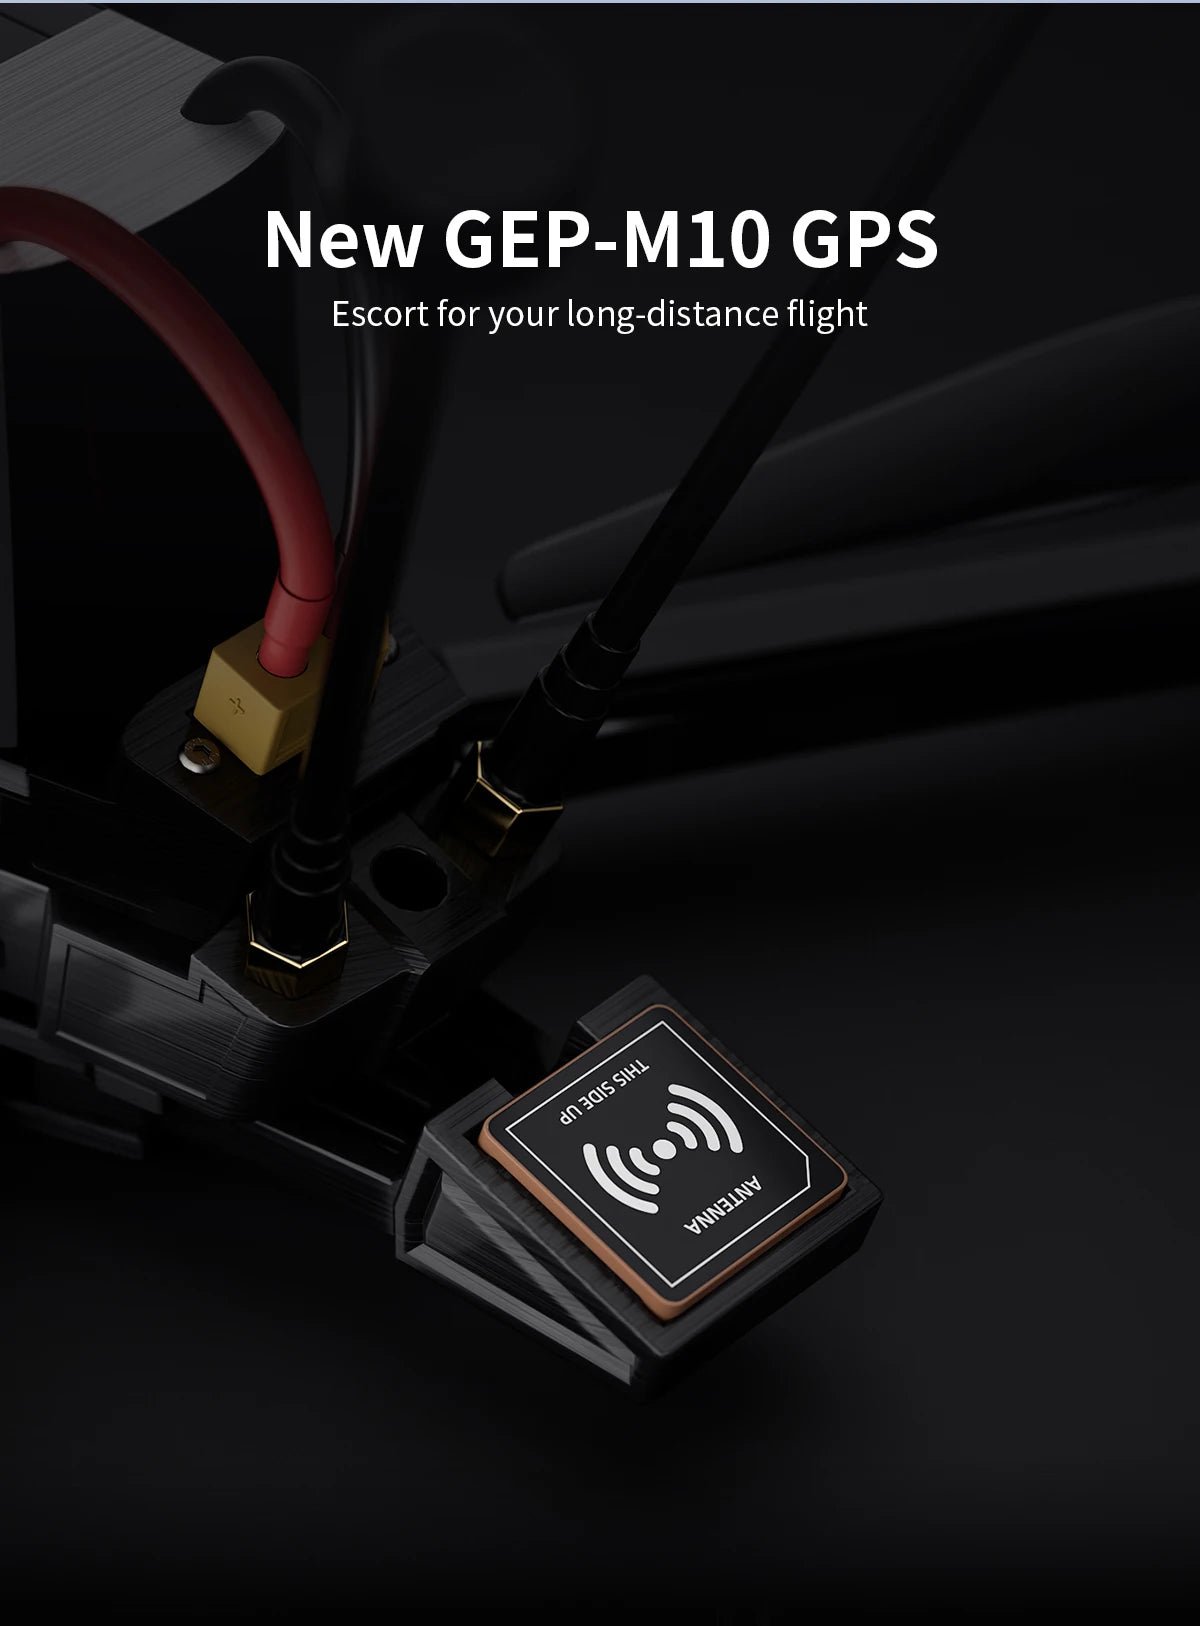 GEPRC MOZ7 HD, GEP-M1O GPS Escort for your long-distance flight 8